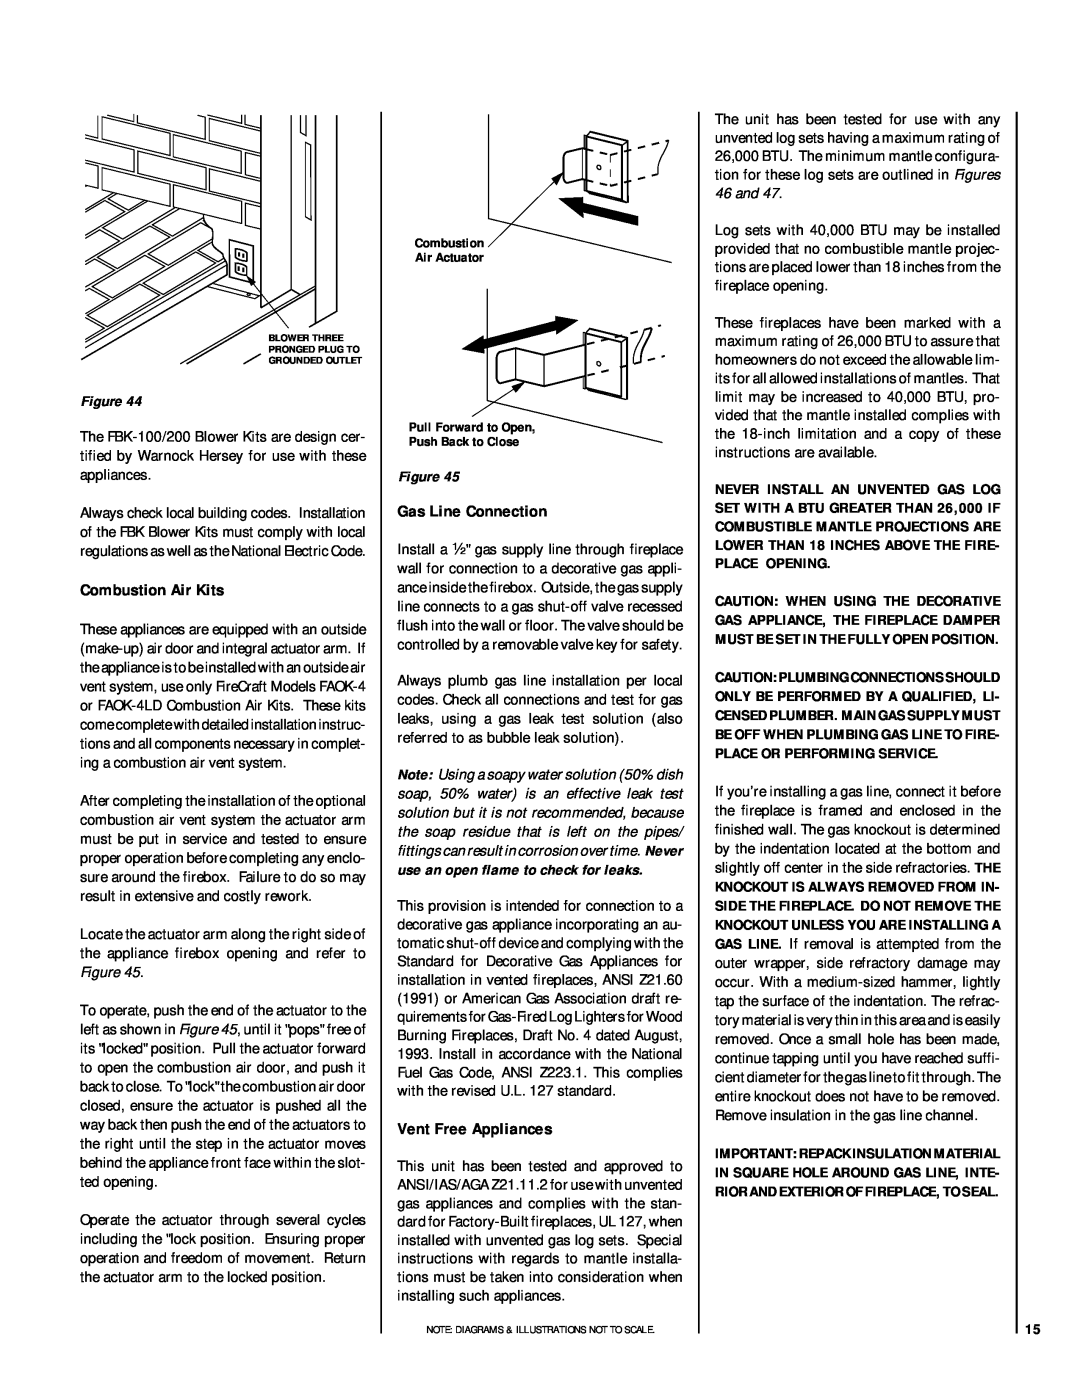 Linksys RDI-36-H HCI-36-H installation instructions Combustion Air Kits, Gas Line Connection, Vent Free Appliances 